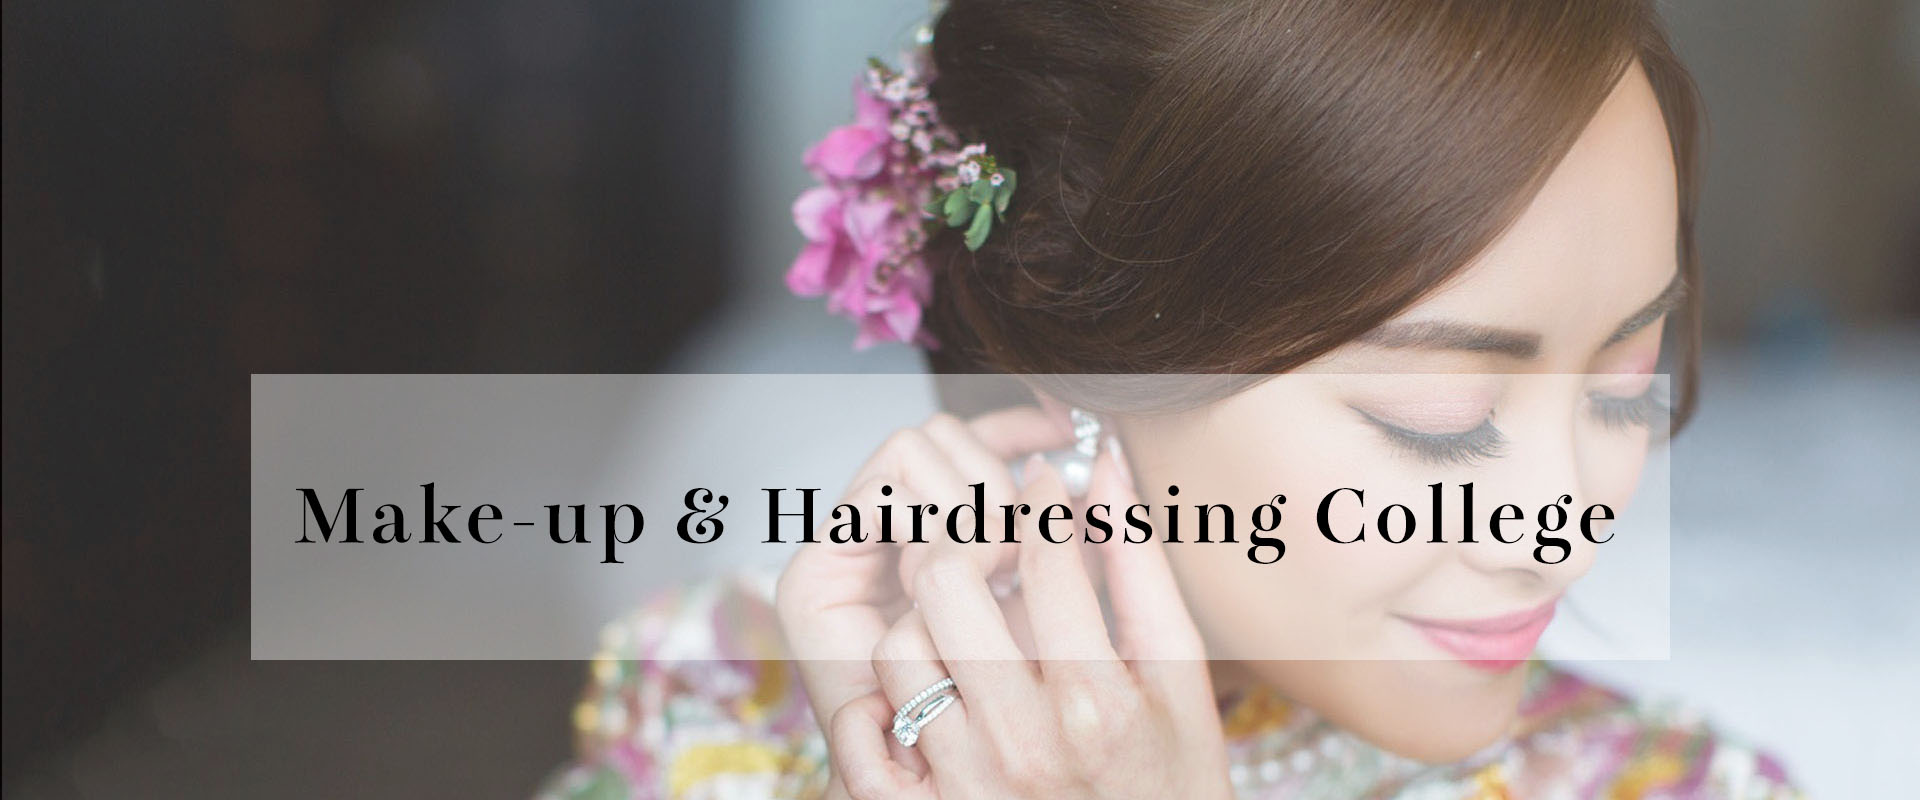 Hairdressing / Makeup Course